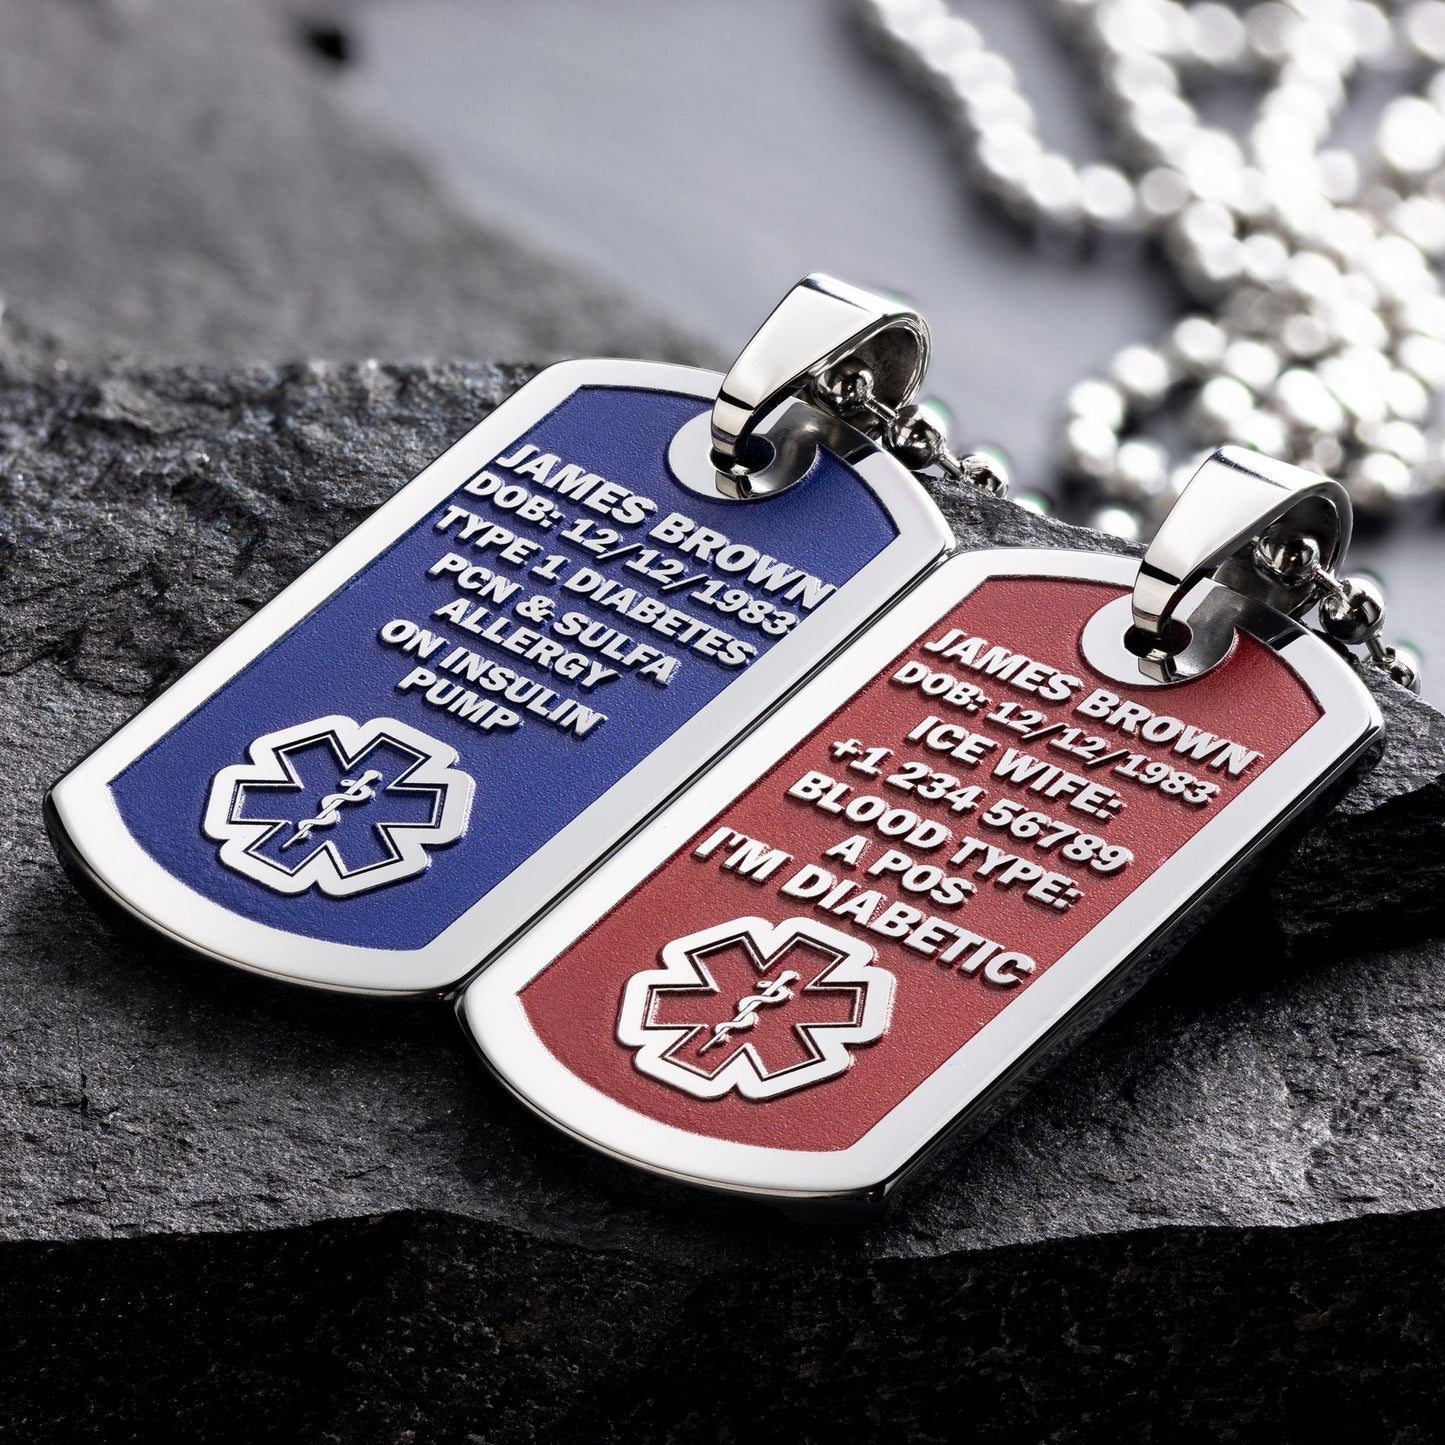 Customizable 3D Engraved Medical ID Necklace - seQua.Shop